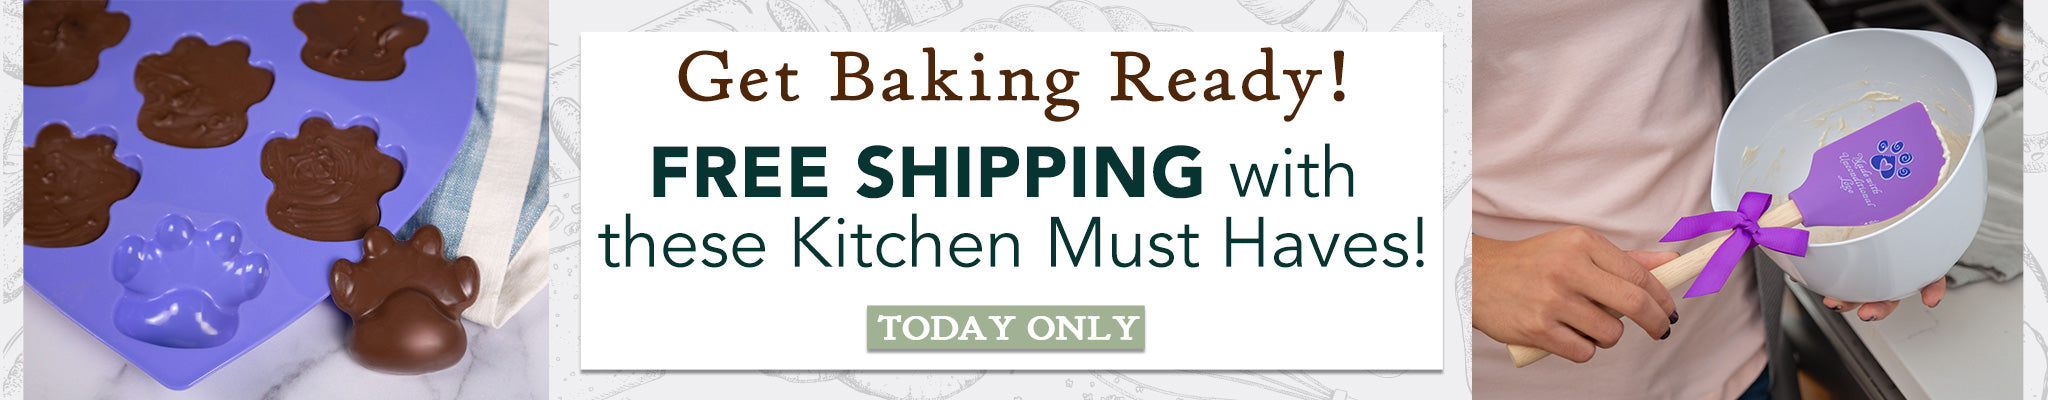 Free Shipping with these Baking Must Haves! | Today Only!